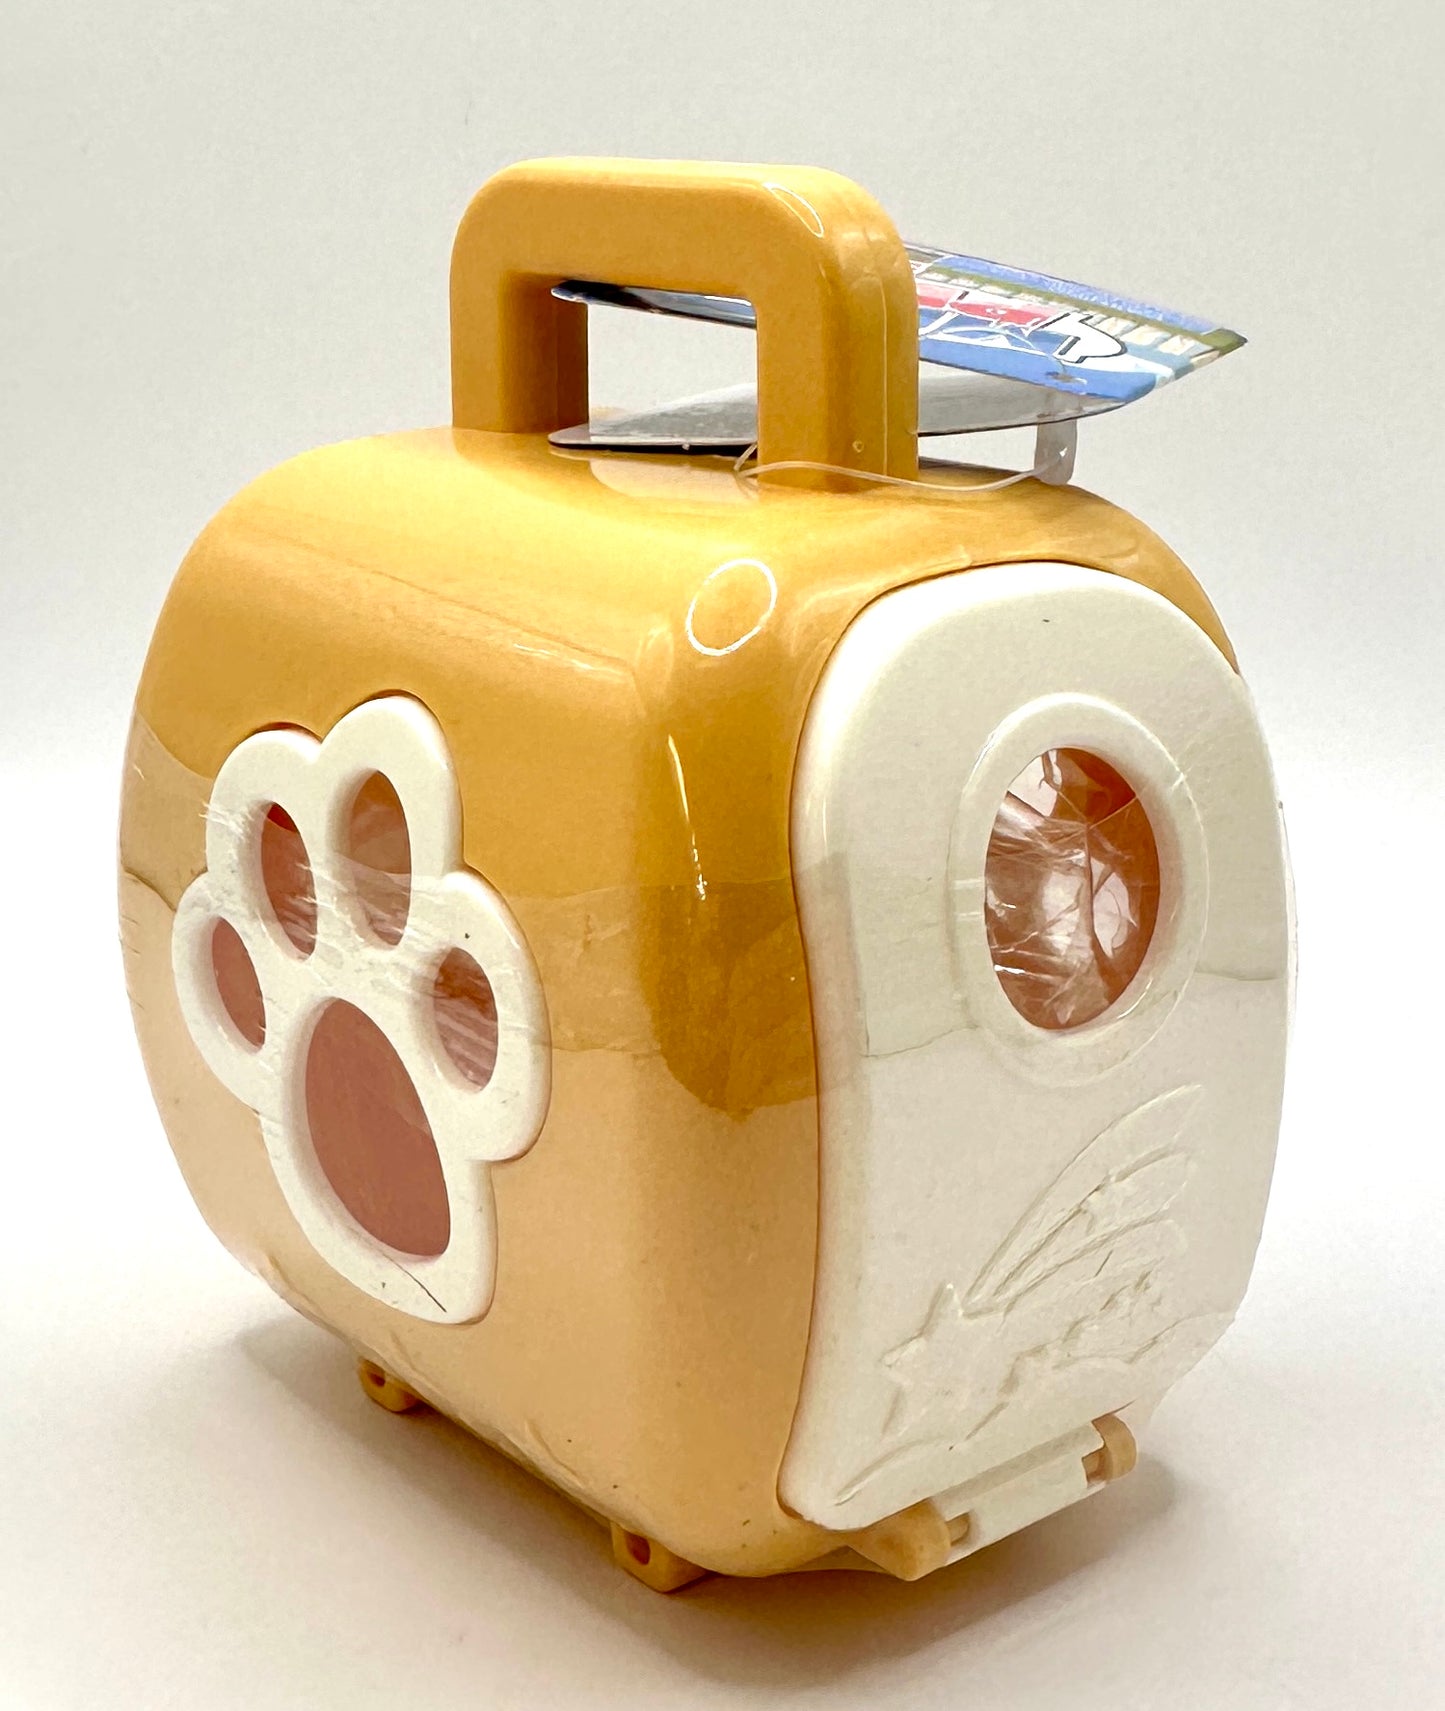 Assorted Mini Pets With Carrier